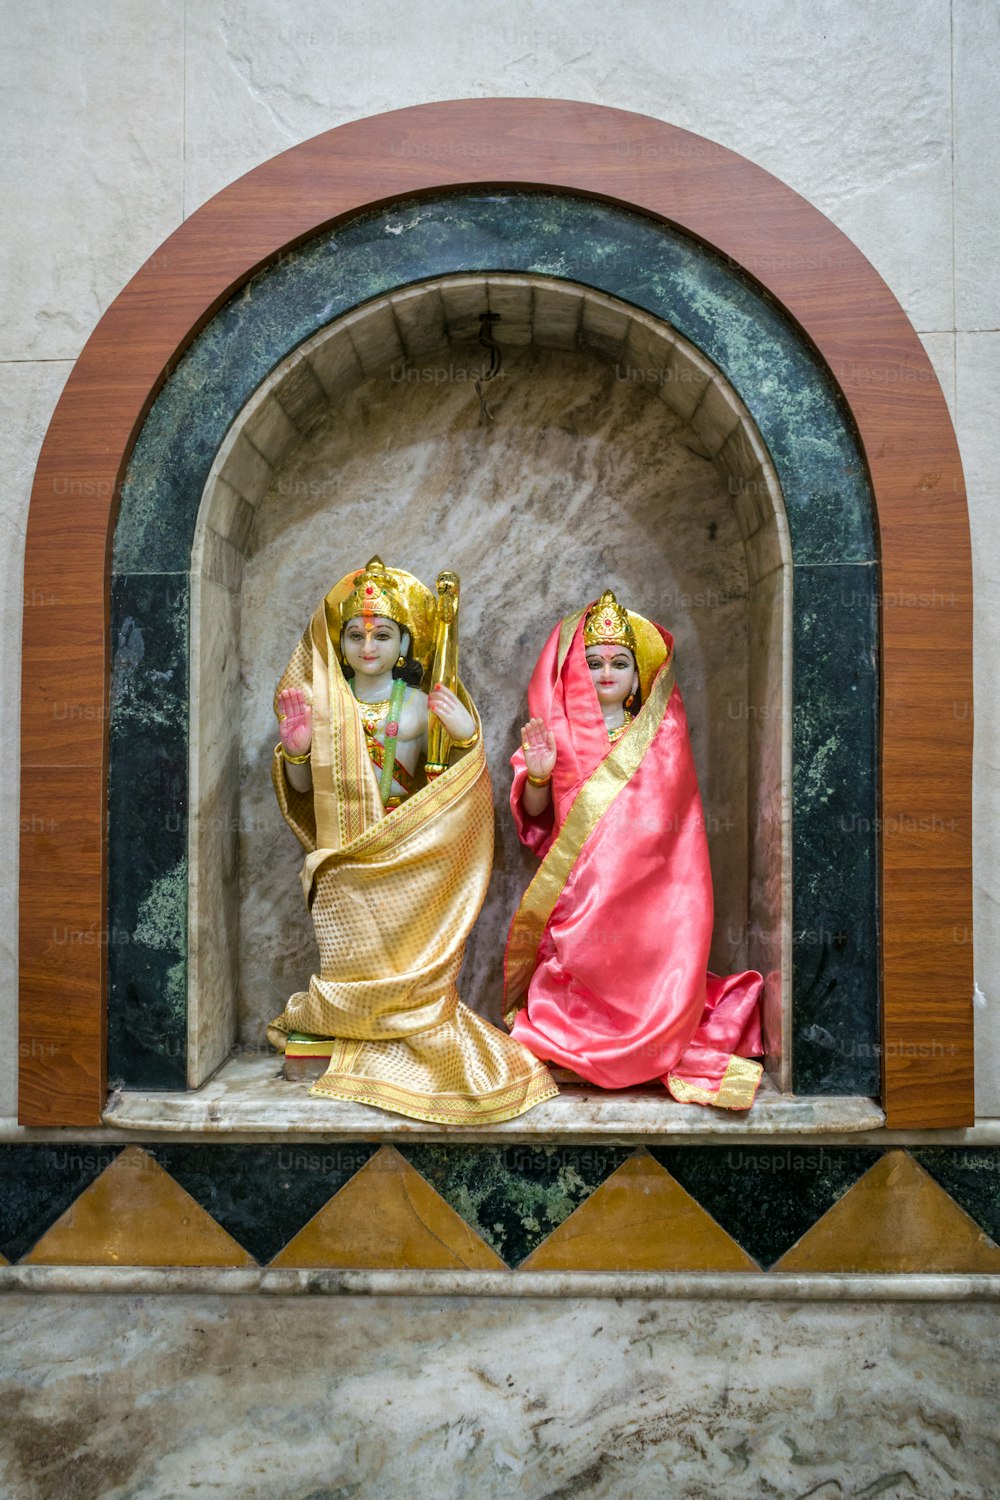 a statue of two women in a niche